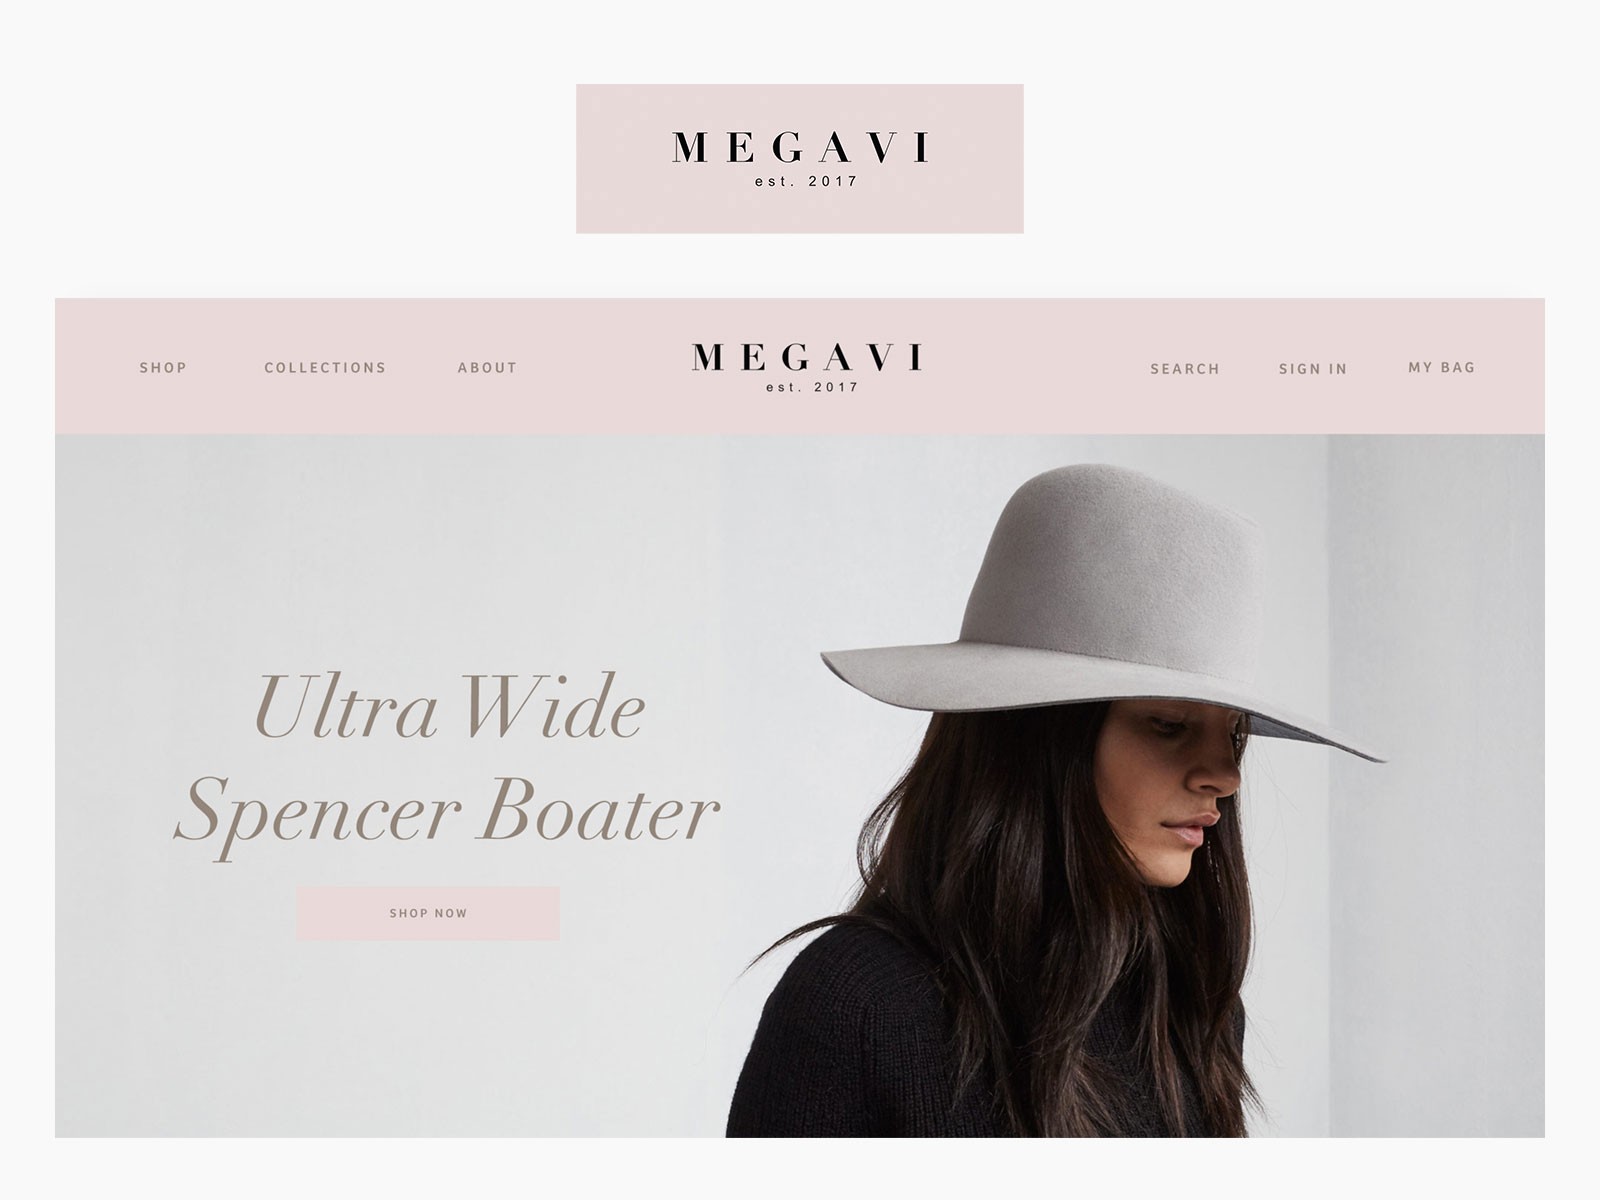 The MEGAVI brand specializes in selling handmade women's hats and accessories online, with a deep connection to Guanajuato, Mexico.